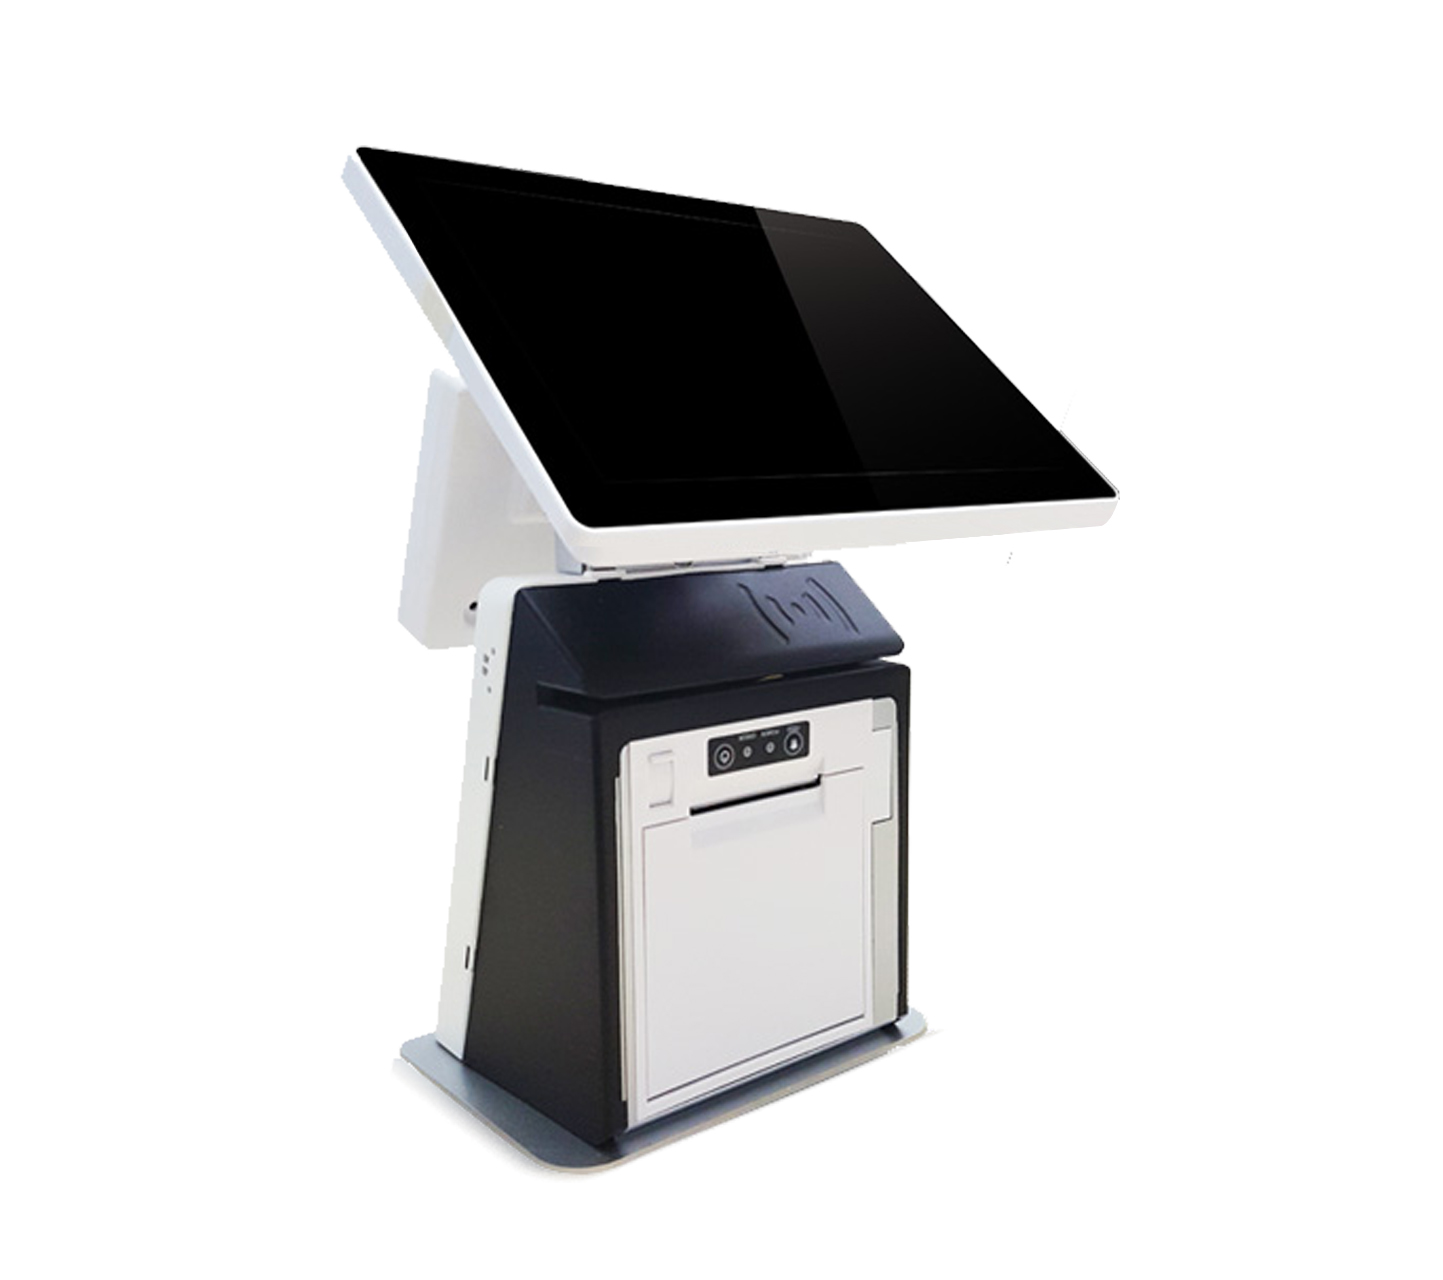 11.6 inch All-in-one Touch Windows POS System with Thermal Printer